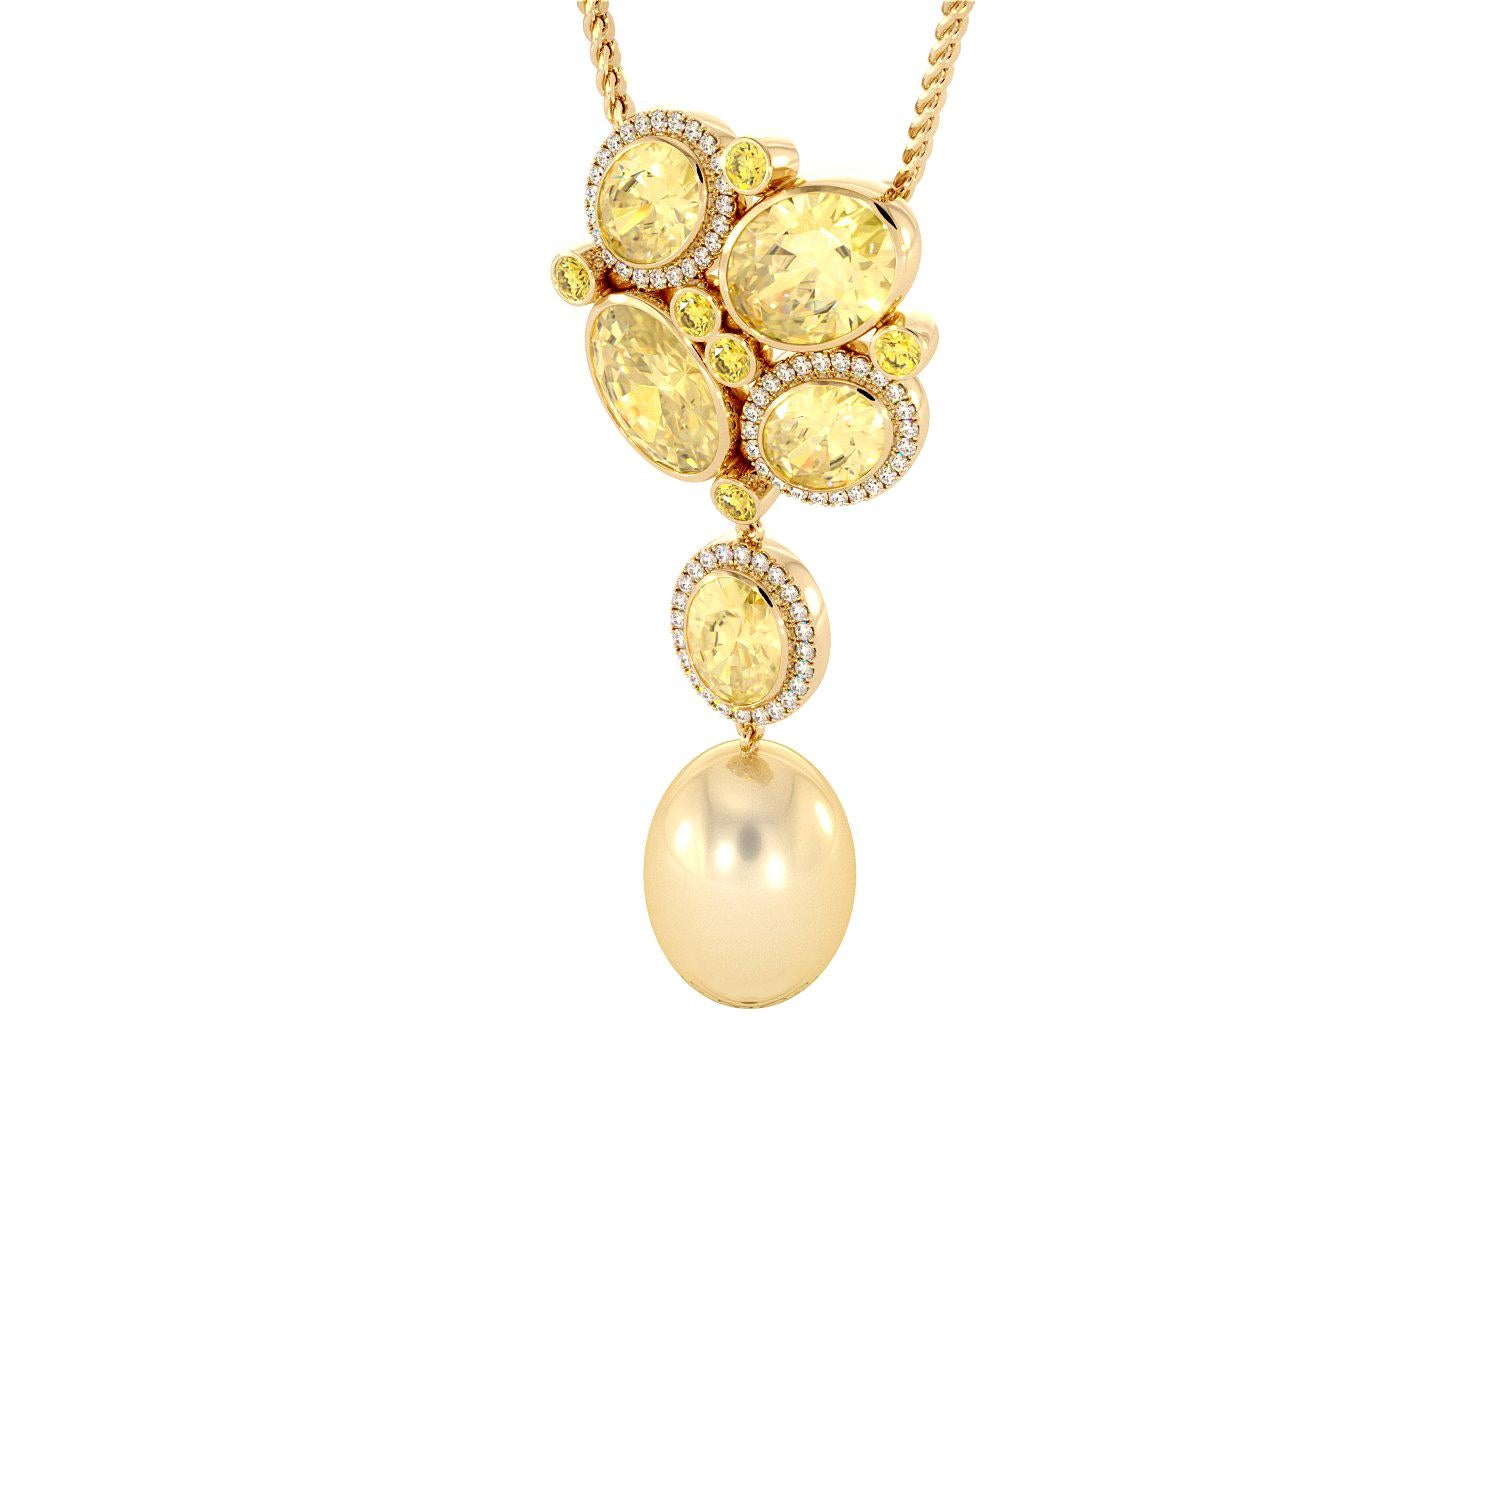 This sophisticated pendant is part of Sunrise Collection. Designed by Emilia Lekarrier, Handcrafted and made in Canada, using high quality diamonds and gemstones. Certified by CGA & GIA Appraiser.

Metal: 14kt Yellow Gold
Diamond Clarity: